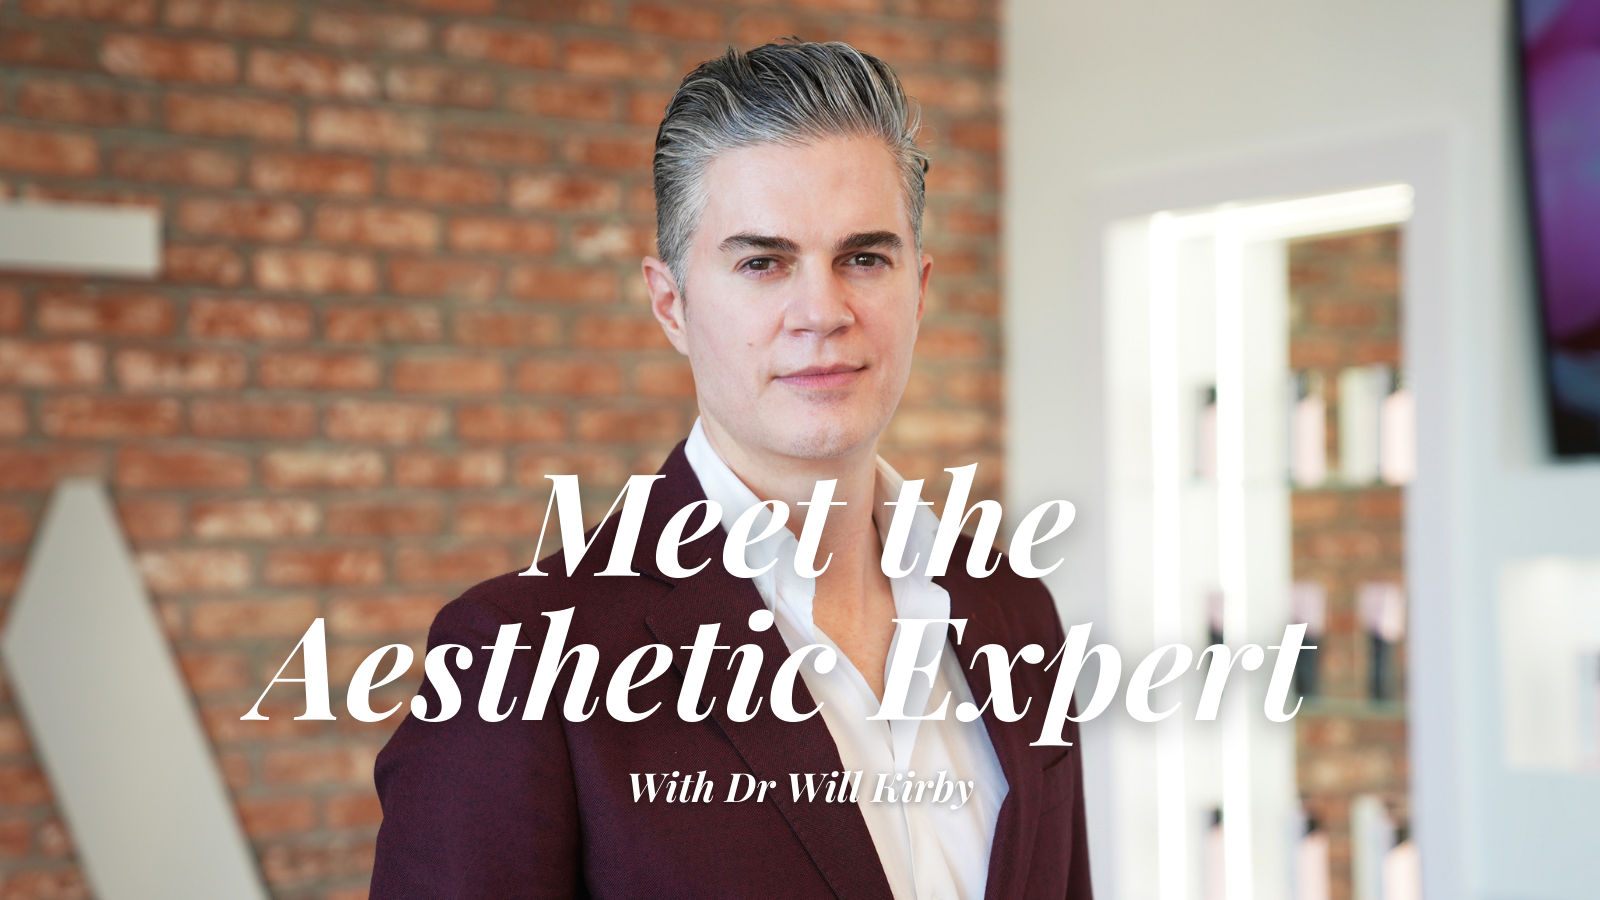 Meet the Aesthetic Expert With Dr Will Kirby: Megan Driscoll